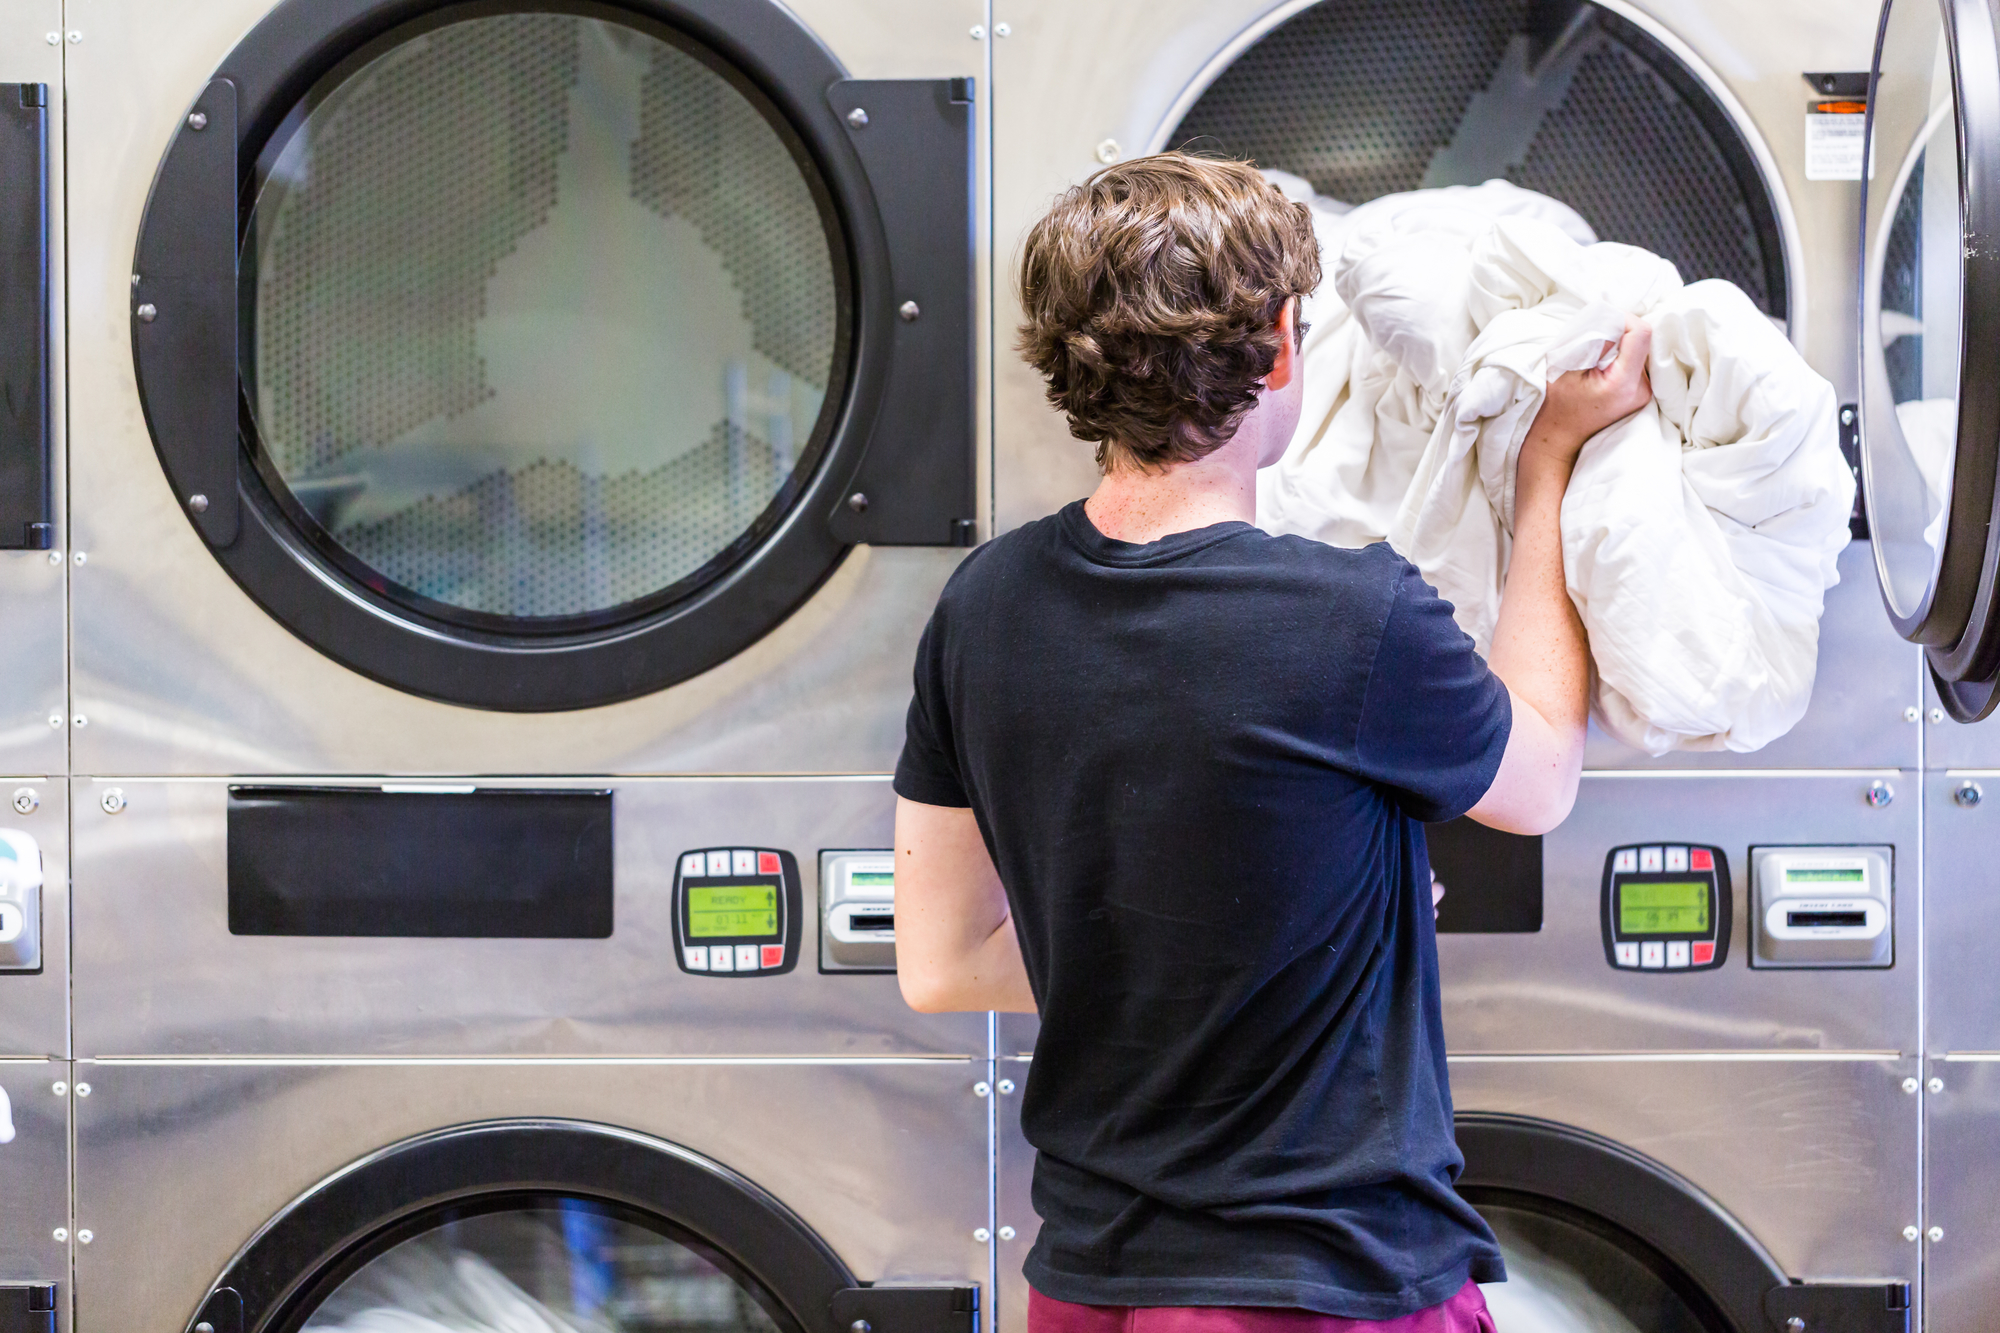 What Your Tenants Expect From an Onsite Laundry